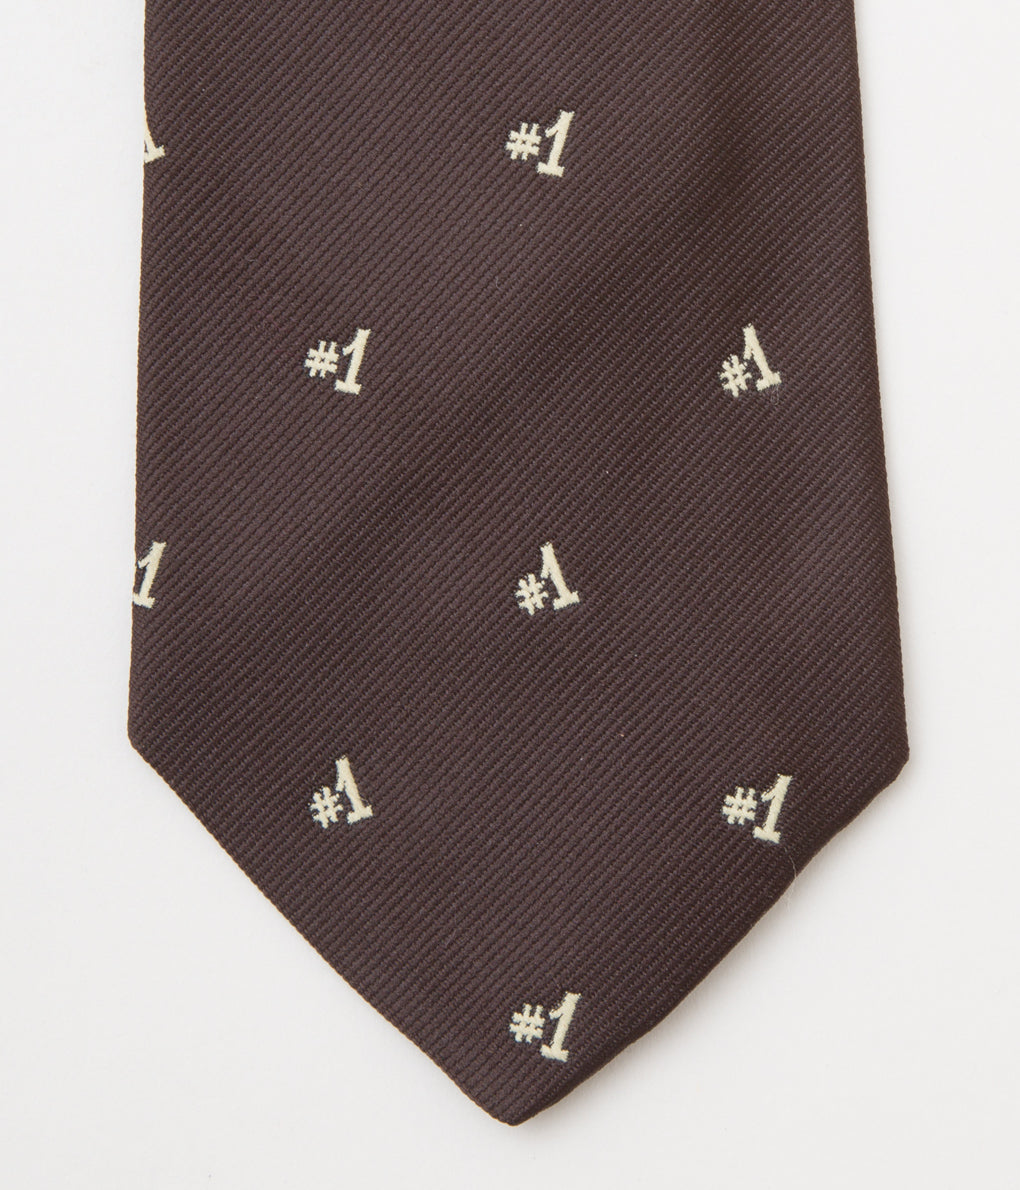 FROM USA "O'CONNELL LUCAS-CHELF EMBROIDERED TIE #1"(BROWN)